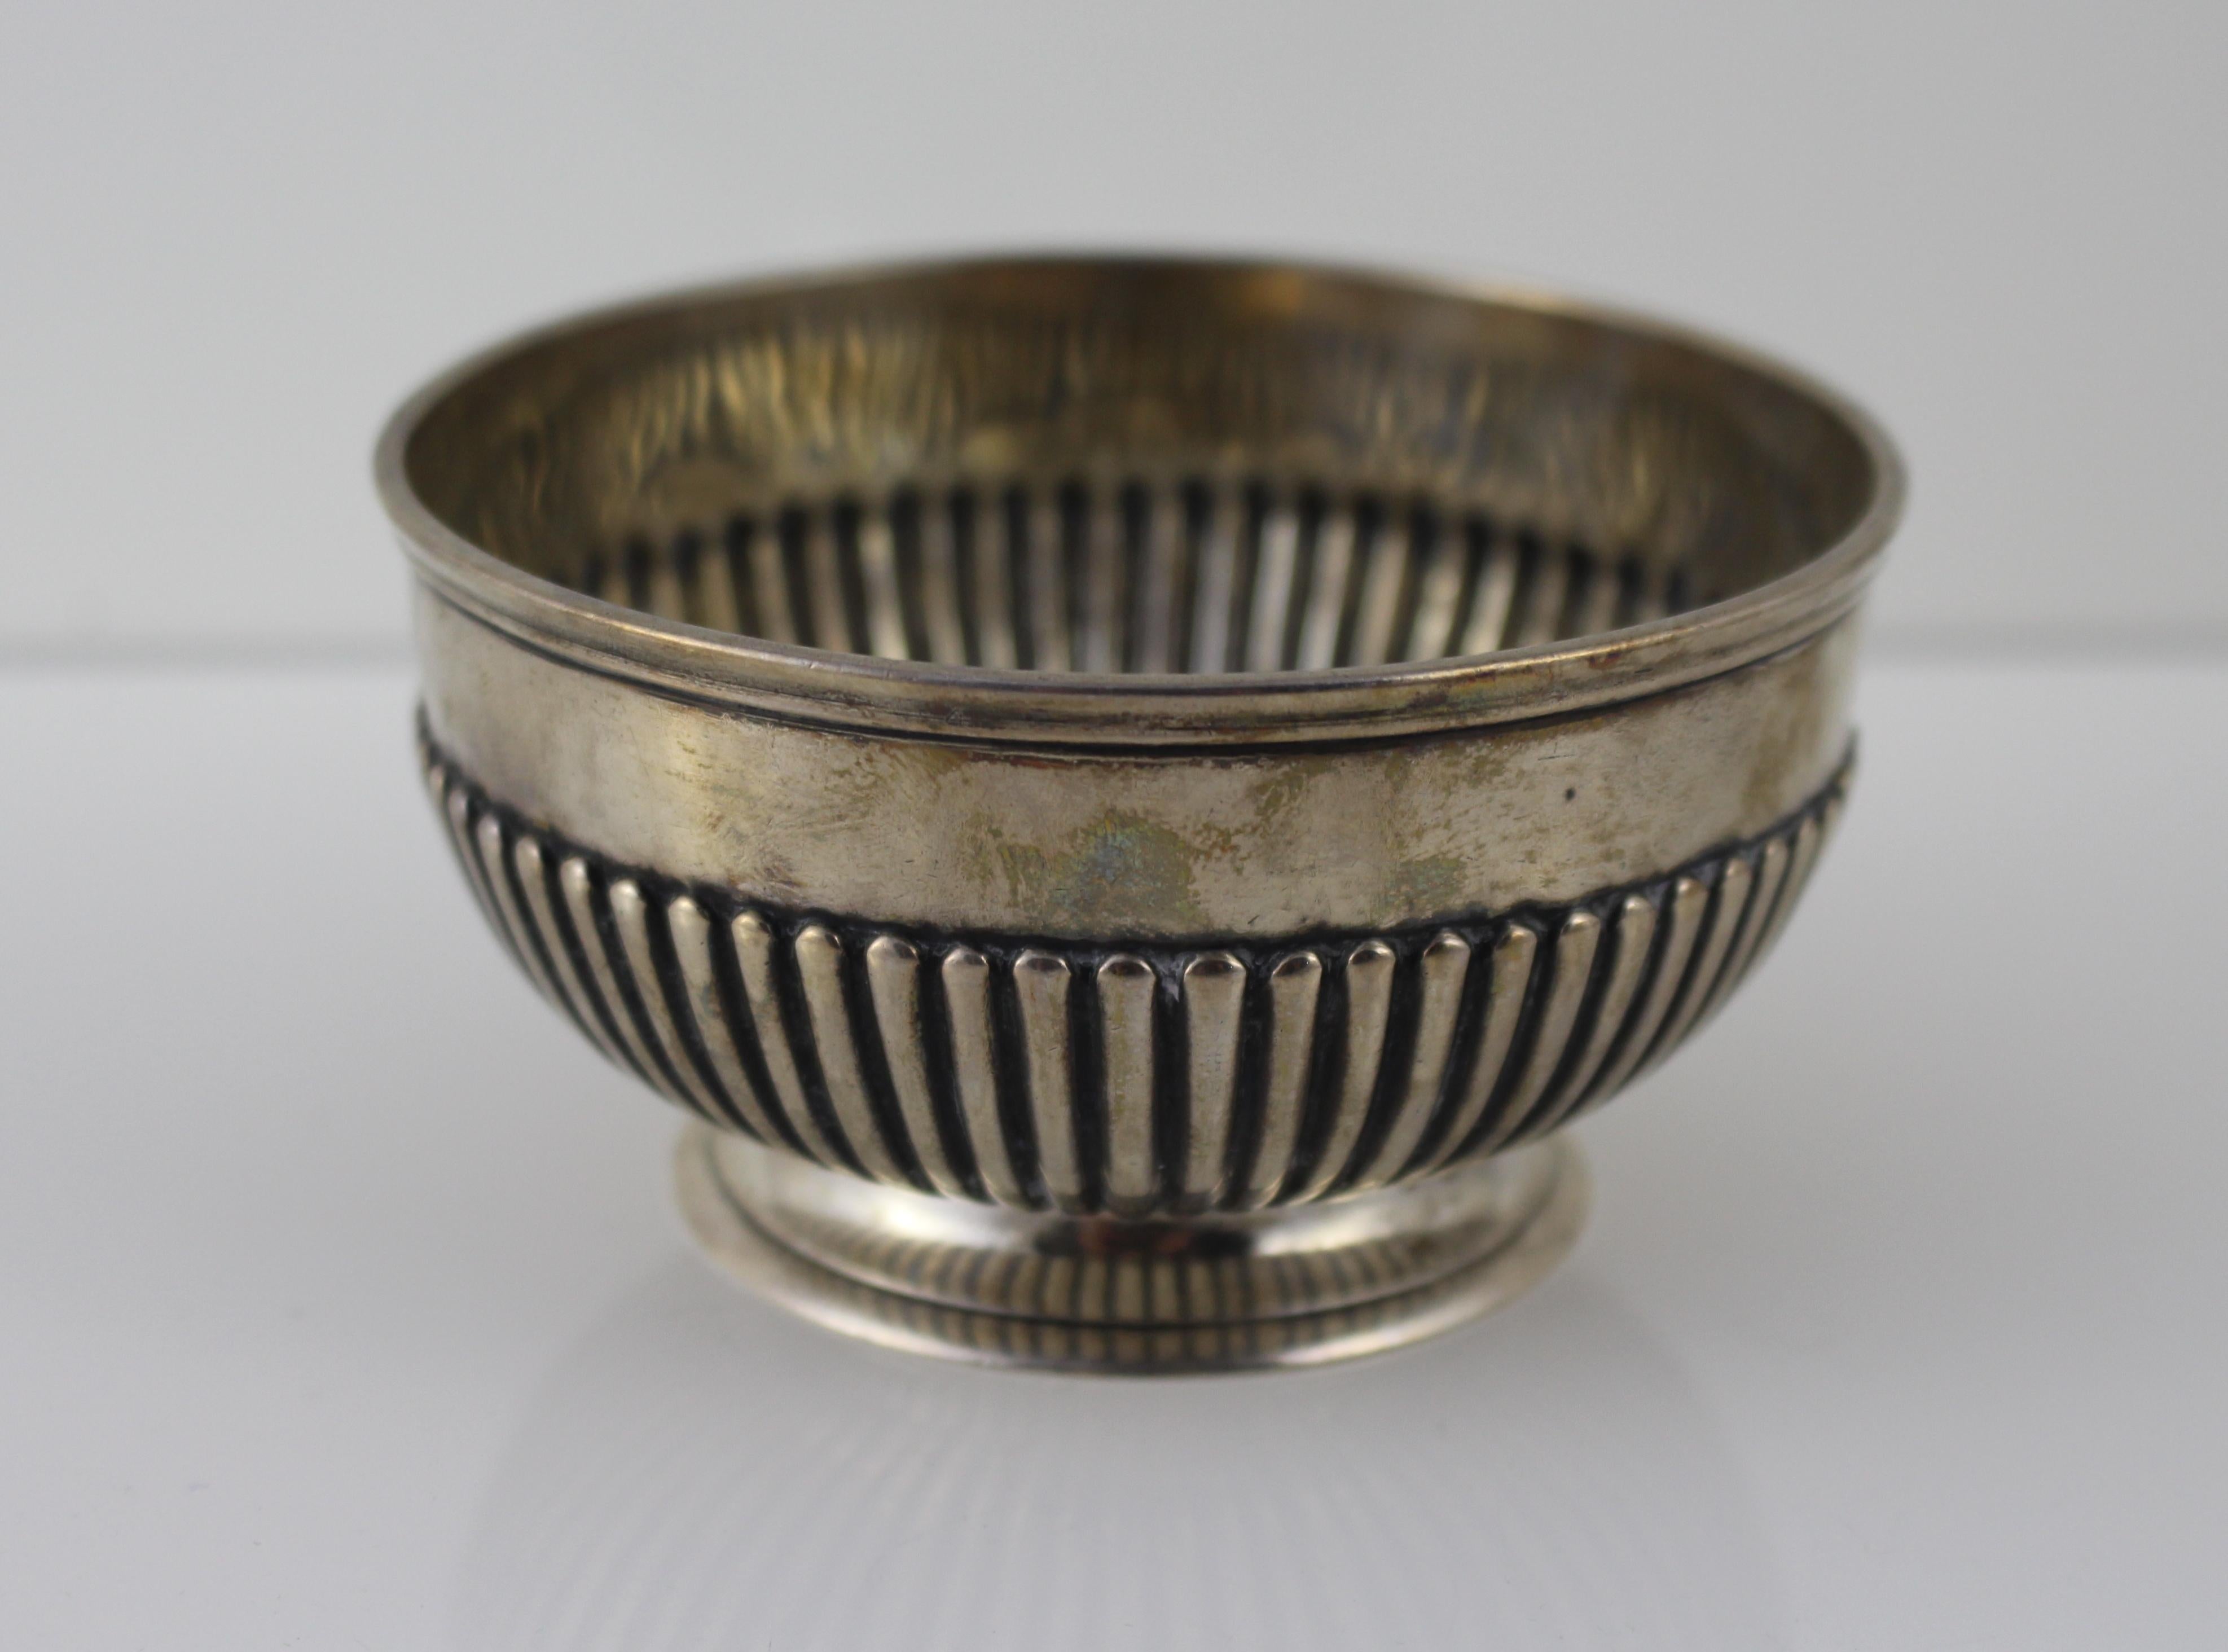 Maker Frederick Brasted, retailed by Dobson Piccadilly
Town Assay London, leopard
Date 1877
Composition sterling silver, 925
Measures: Diameter 9.5 cm / 3 3/4 in
Height 5 cm / 2 in
Weight 109.8 g
Condition: Very good condition commensurate